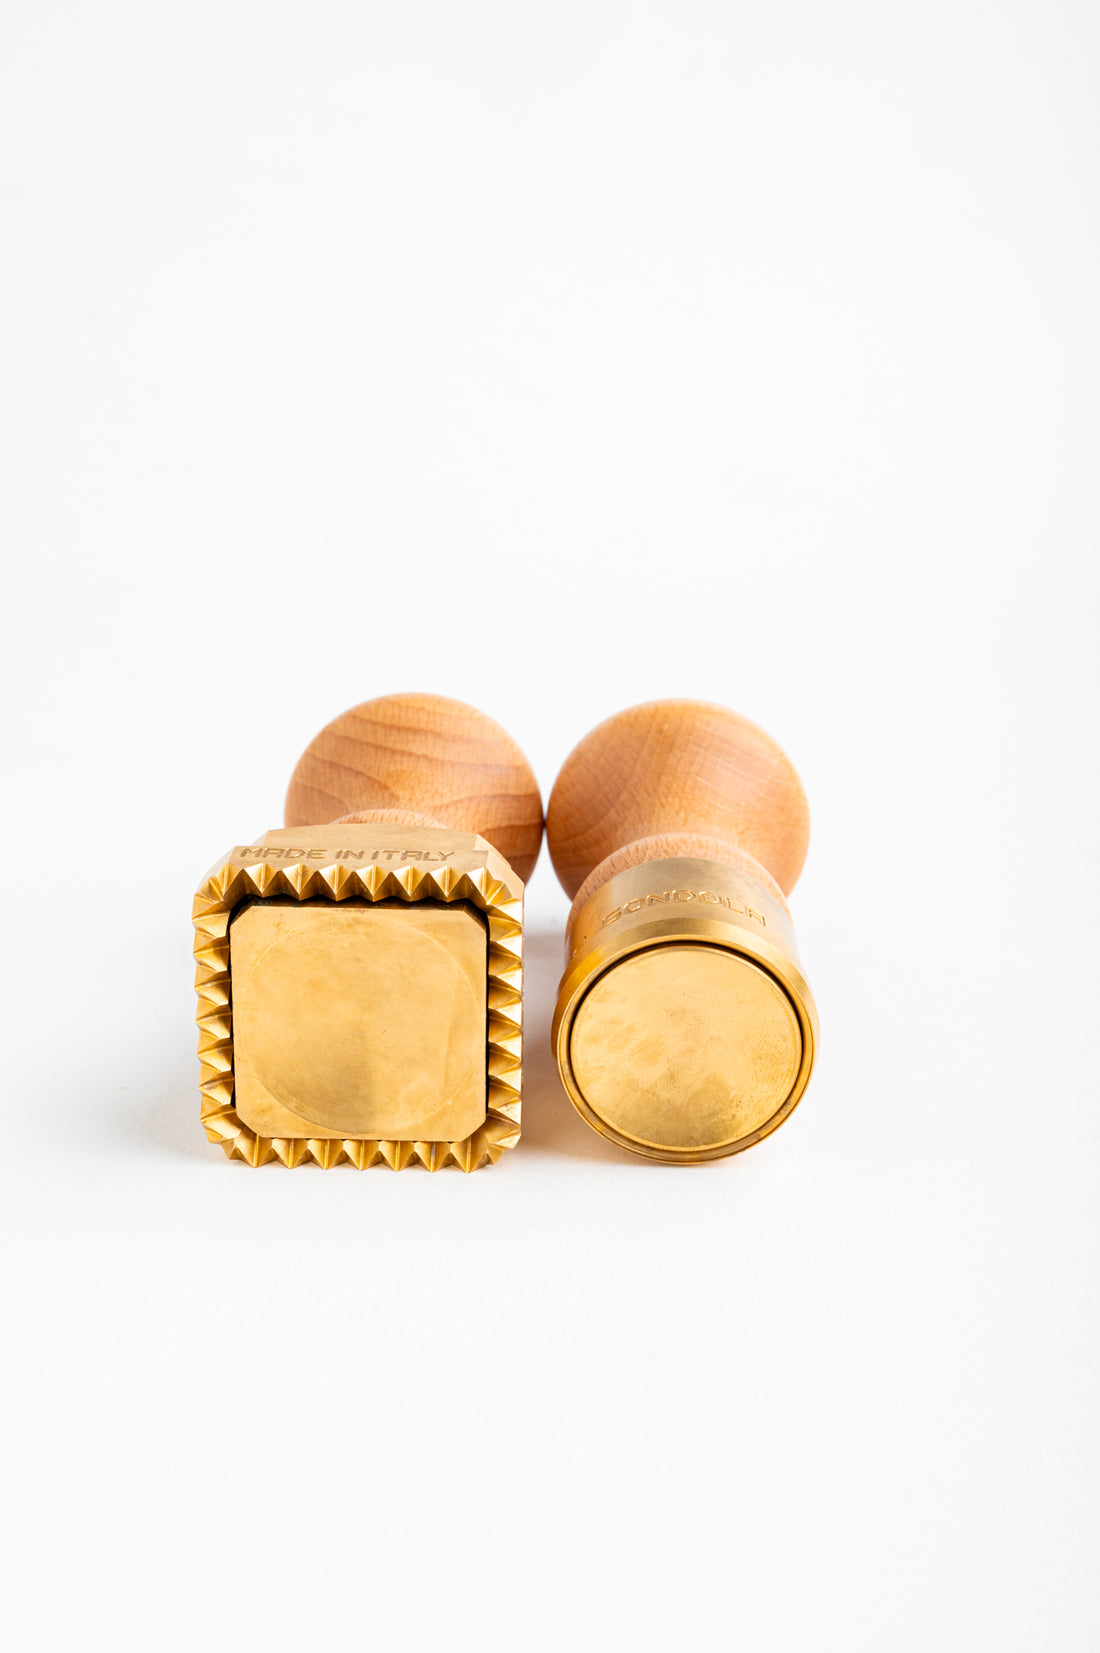 Professional set of two pasta and ravioli stamps: 1 Round and 1 Square